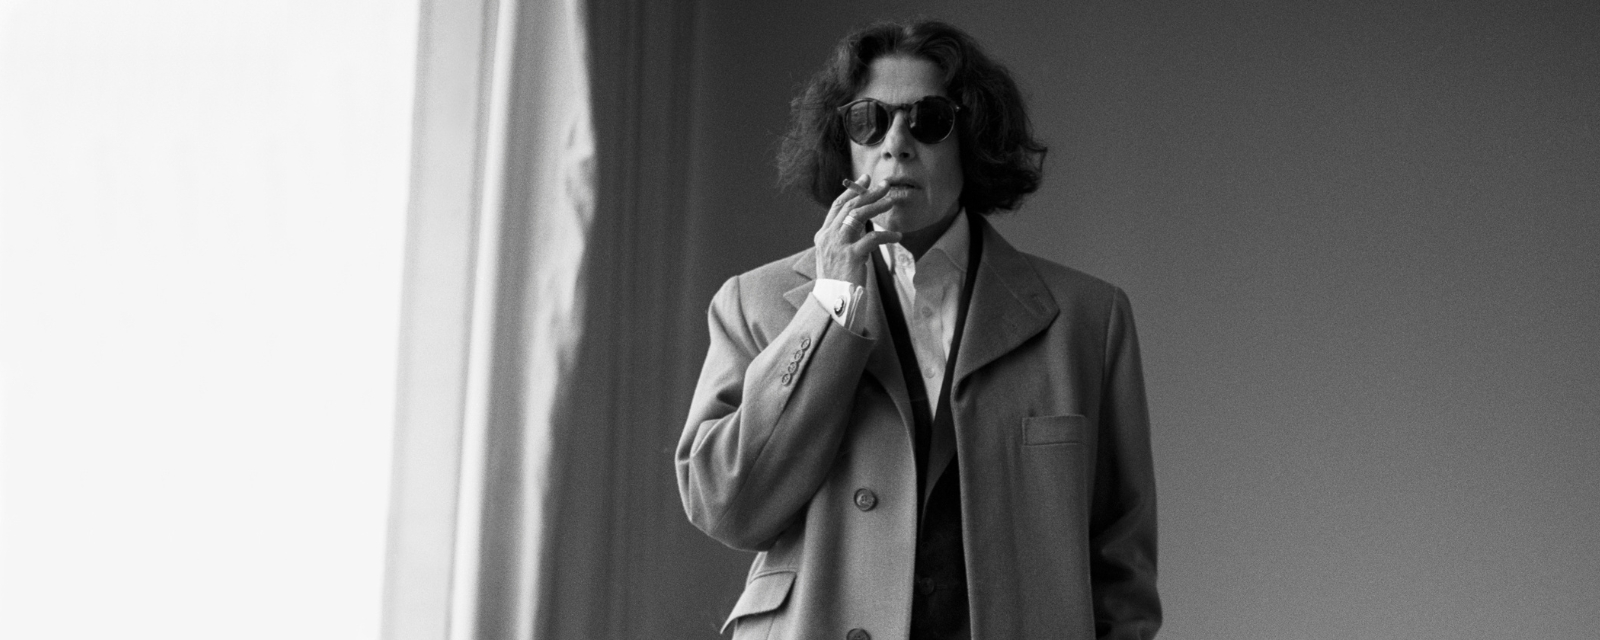 An Evening with Fran Lebowitz - Feature Image